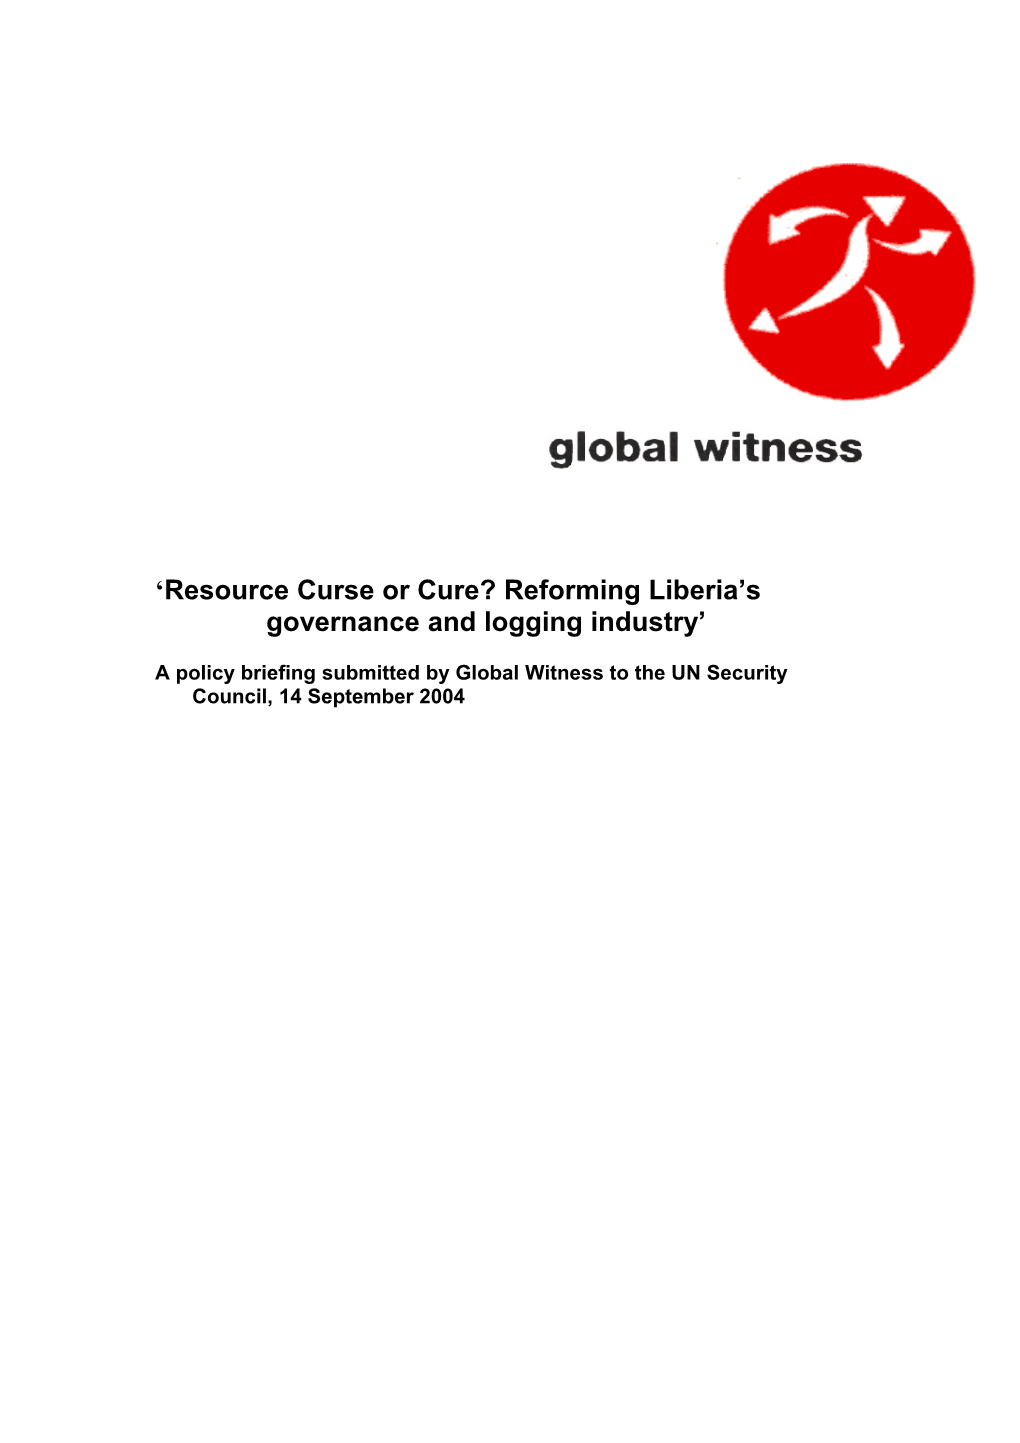 Resource Curse Or Cure? Reforming Liberia S Governance and Logging Industry